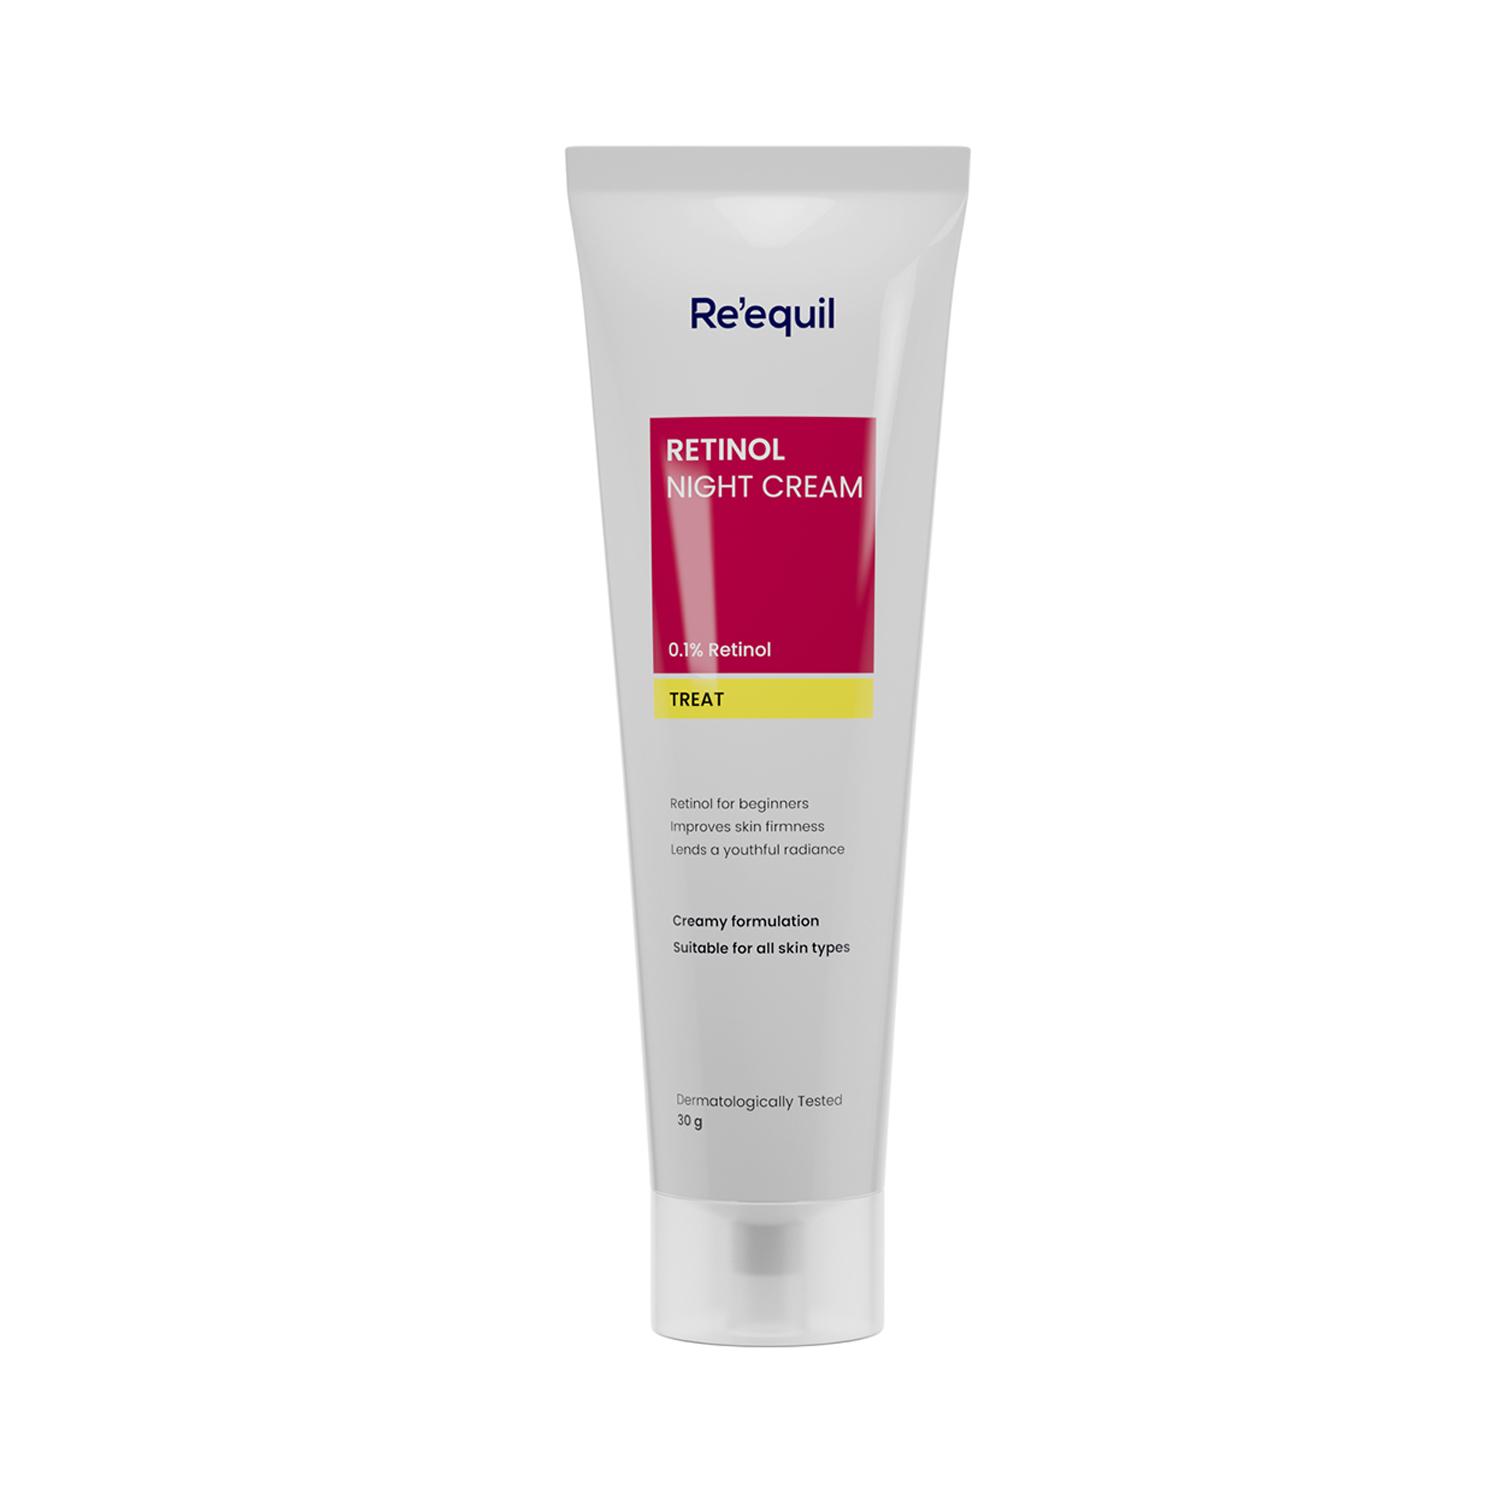 Re'equil | Re'equil Retinol Night Cream (30g)